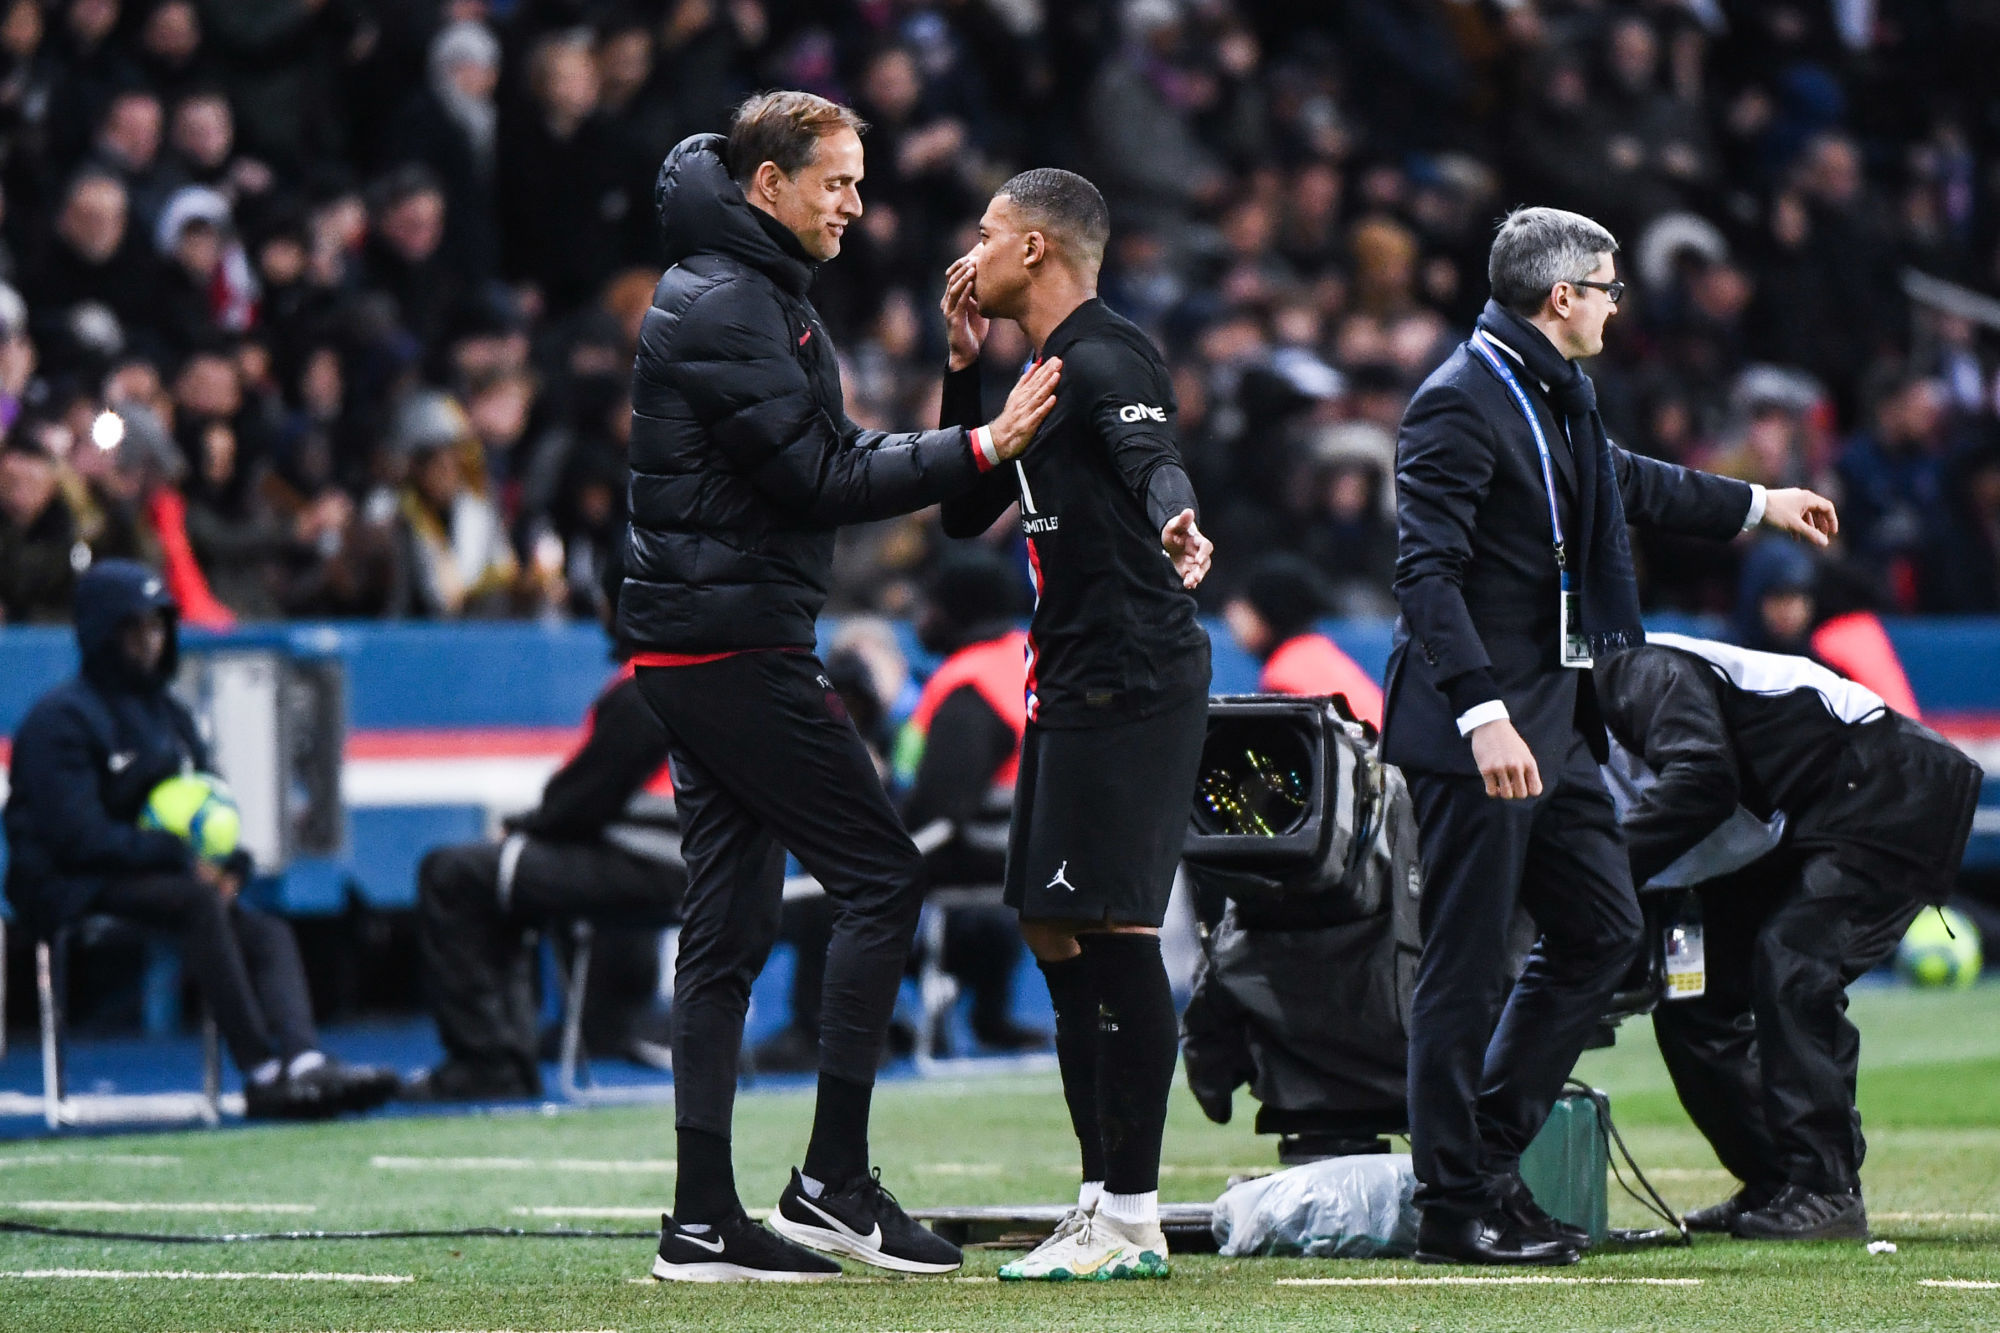 Kylian MBAPPE of PSG talks with Thomas TUCHEL coach of PSG during the Ligue 1 match between Paris and Montpellier at Parc des Princes on February 1, 2020 in Paris, France. (Photo by Anthony Dibon/Icon Sport) - Thomas TUCHEL - Kylian MBAPPE - Parc des Princes - Paris (France)